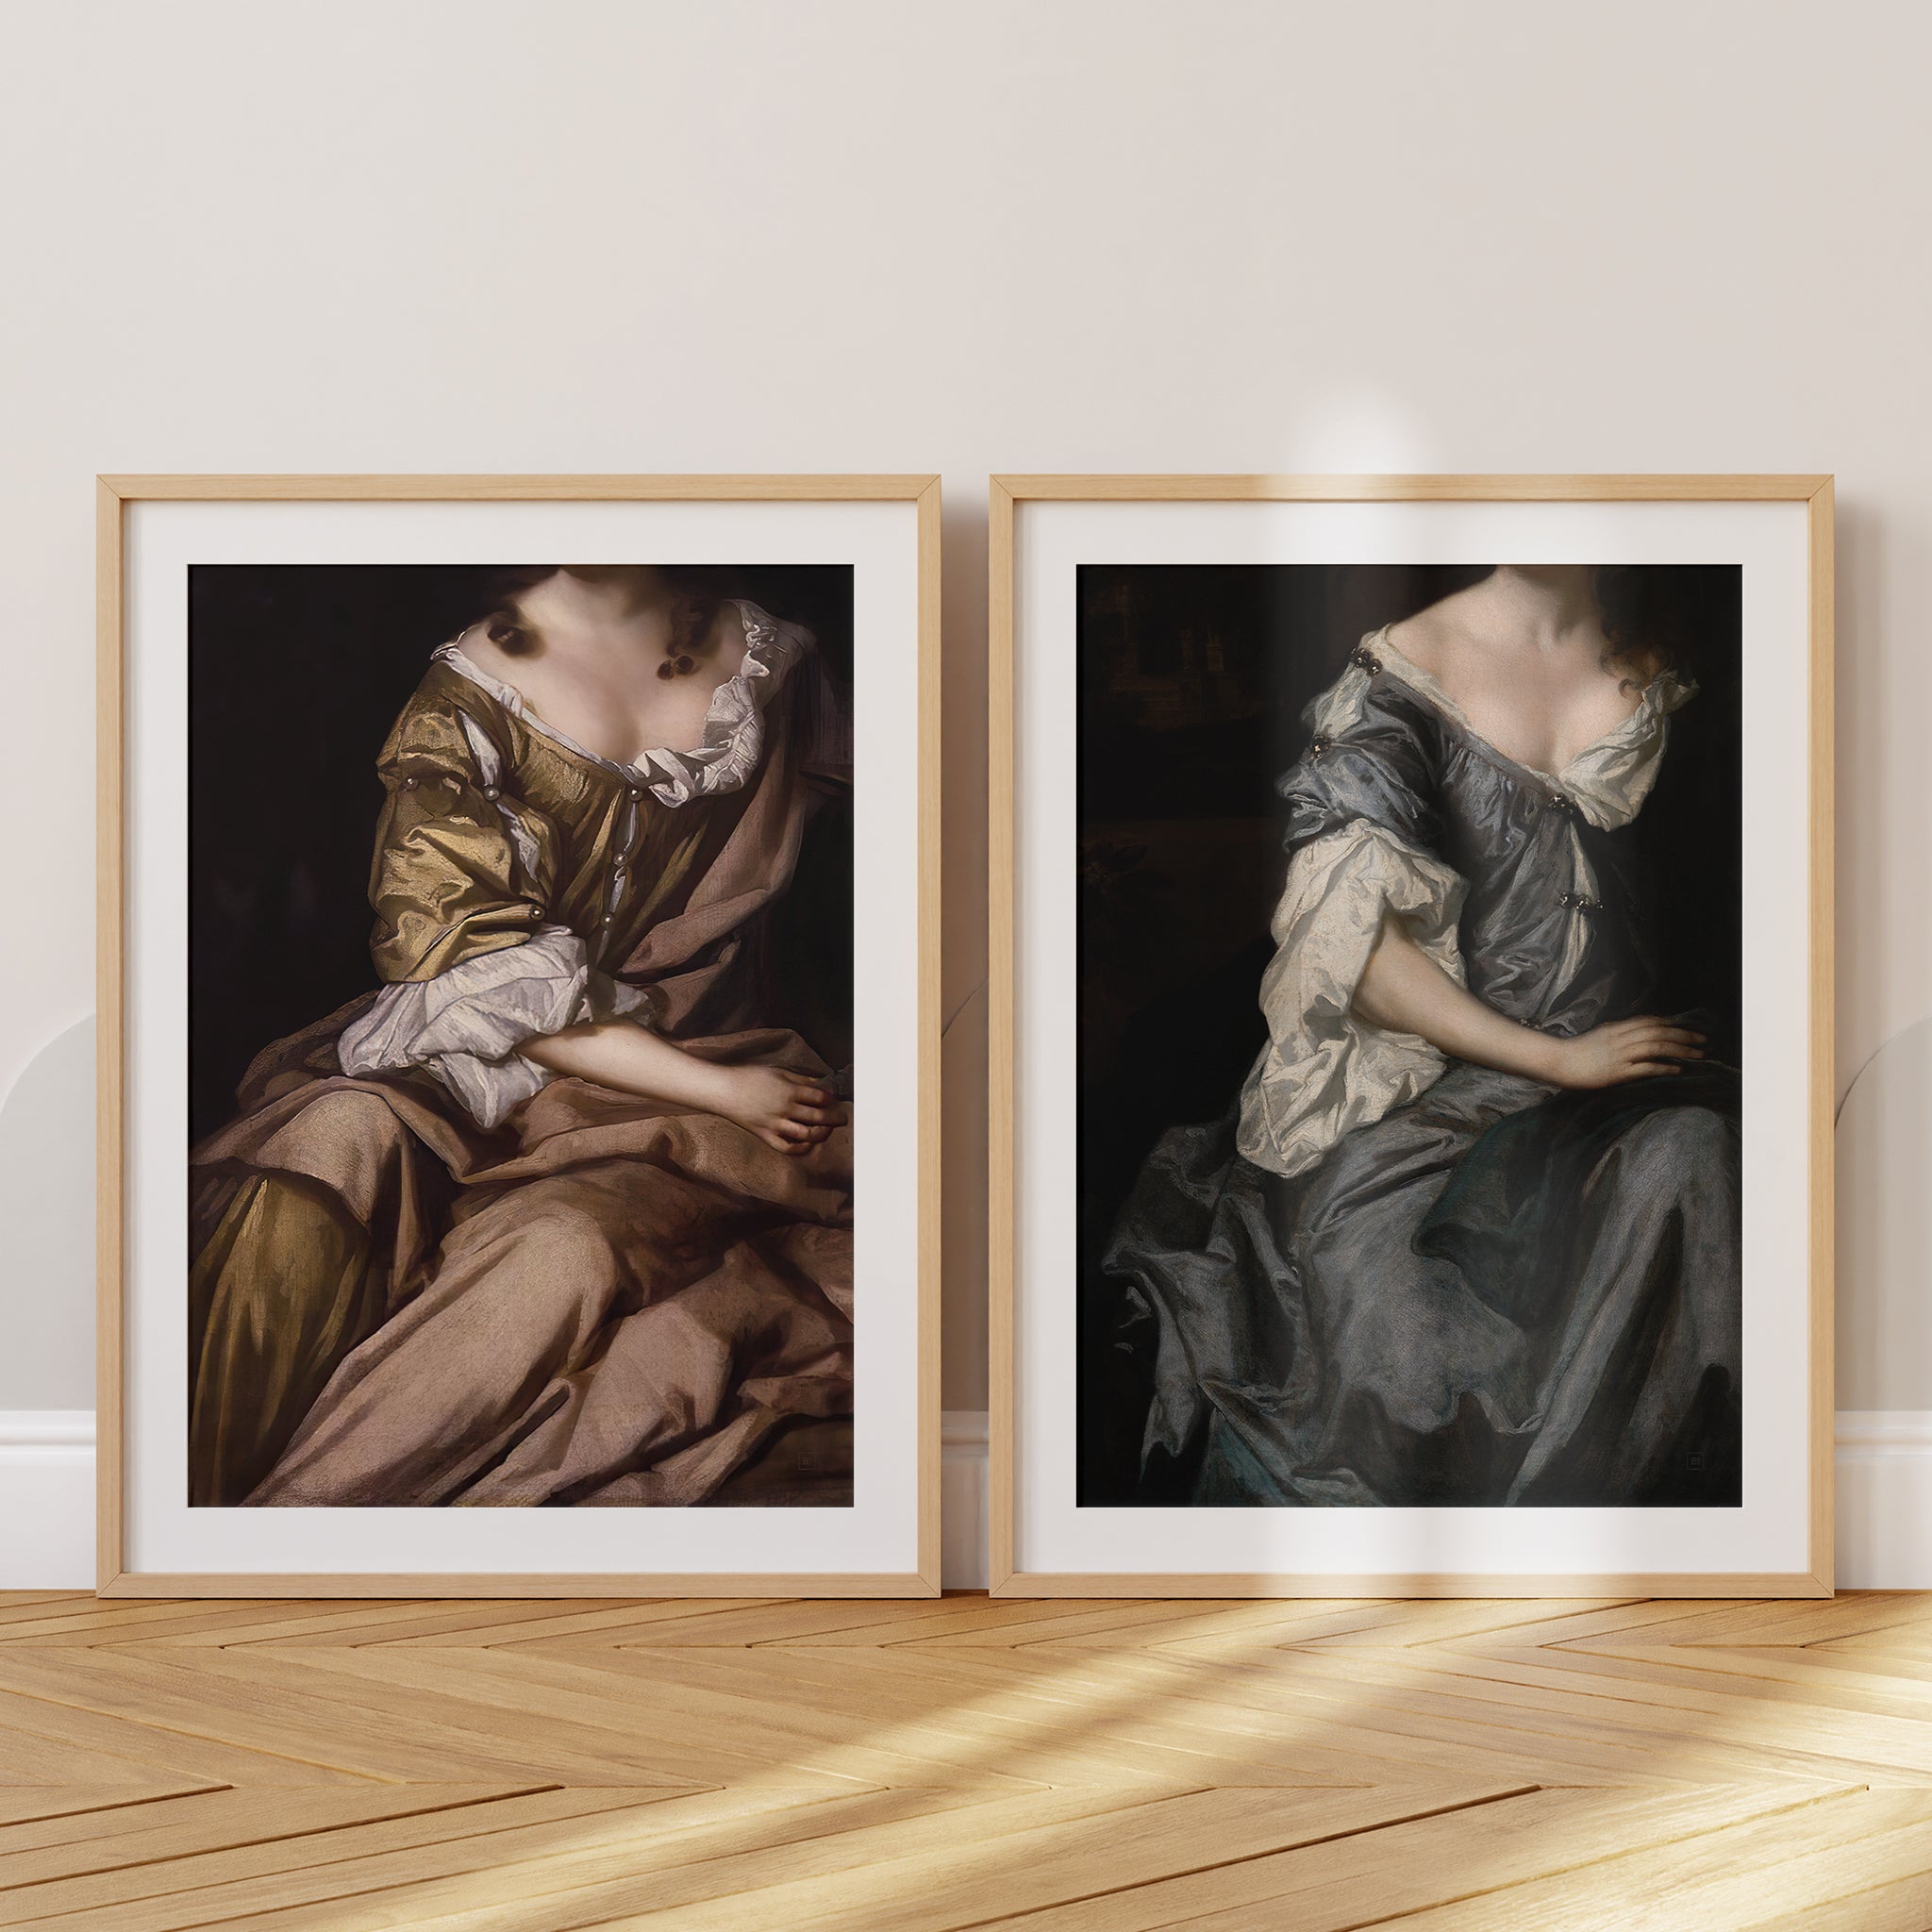 Be inspired by our altered Victorian Woman in Gray Satin Dress art print. This artwork was printed using the giclée process on archival acid-free paper and is presented in a set of two oak frames with passe-partout that captures its timeless beauty in every detail.